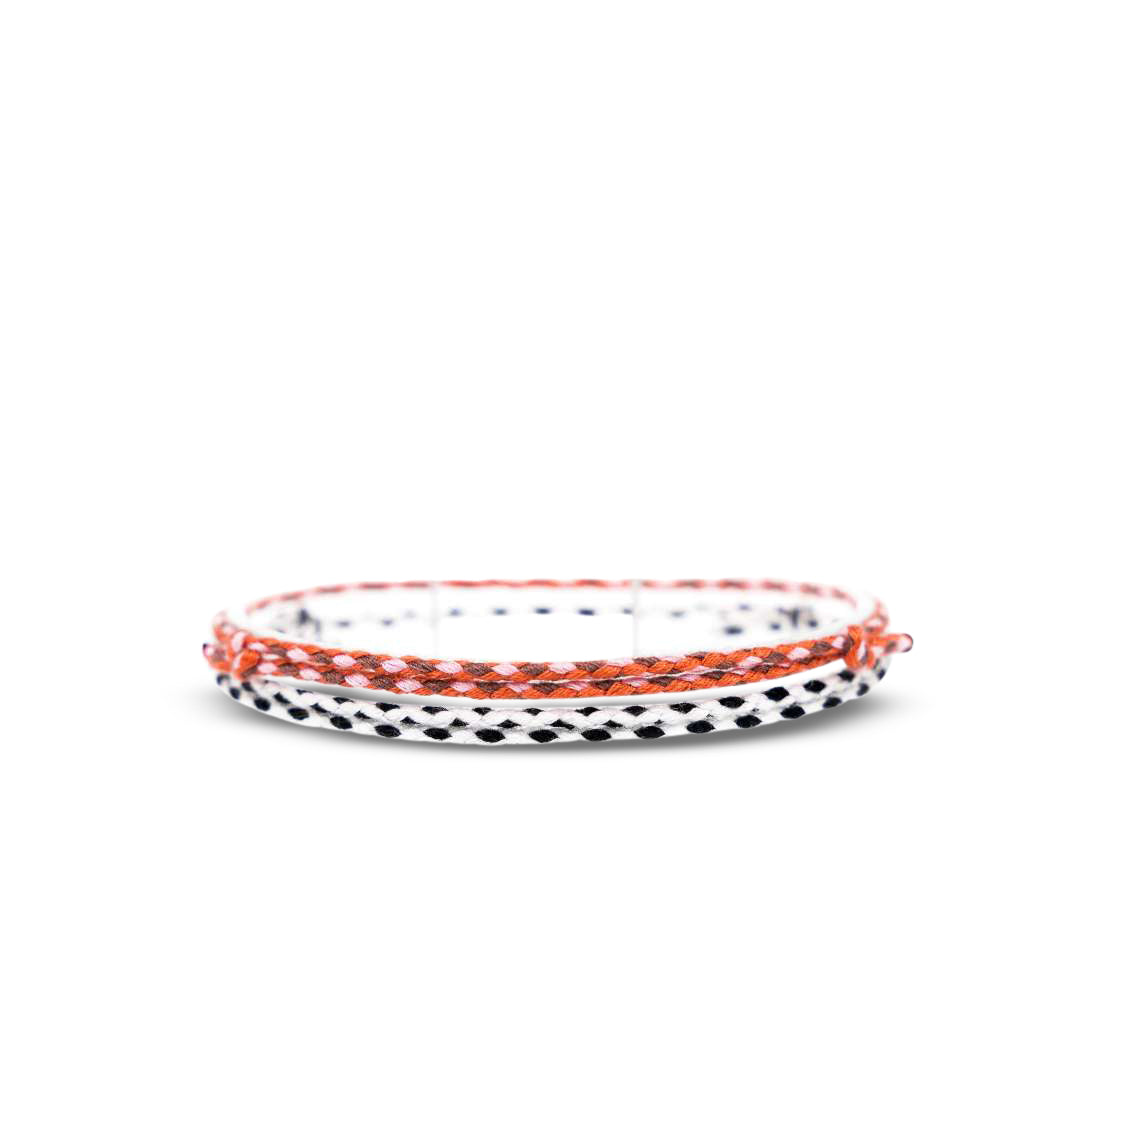 2x Cotton Surfer Anklet - Red + White